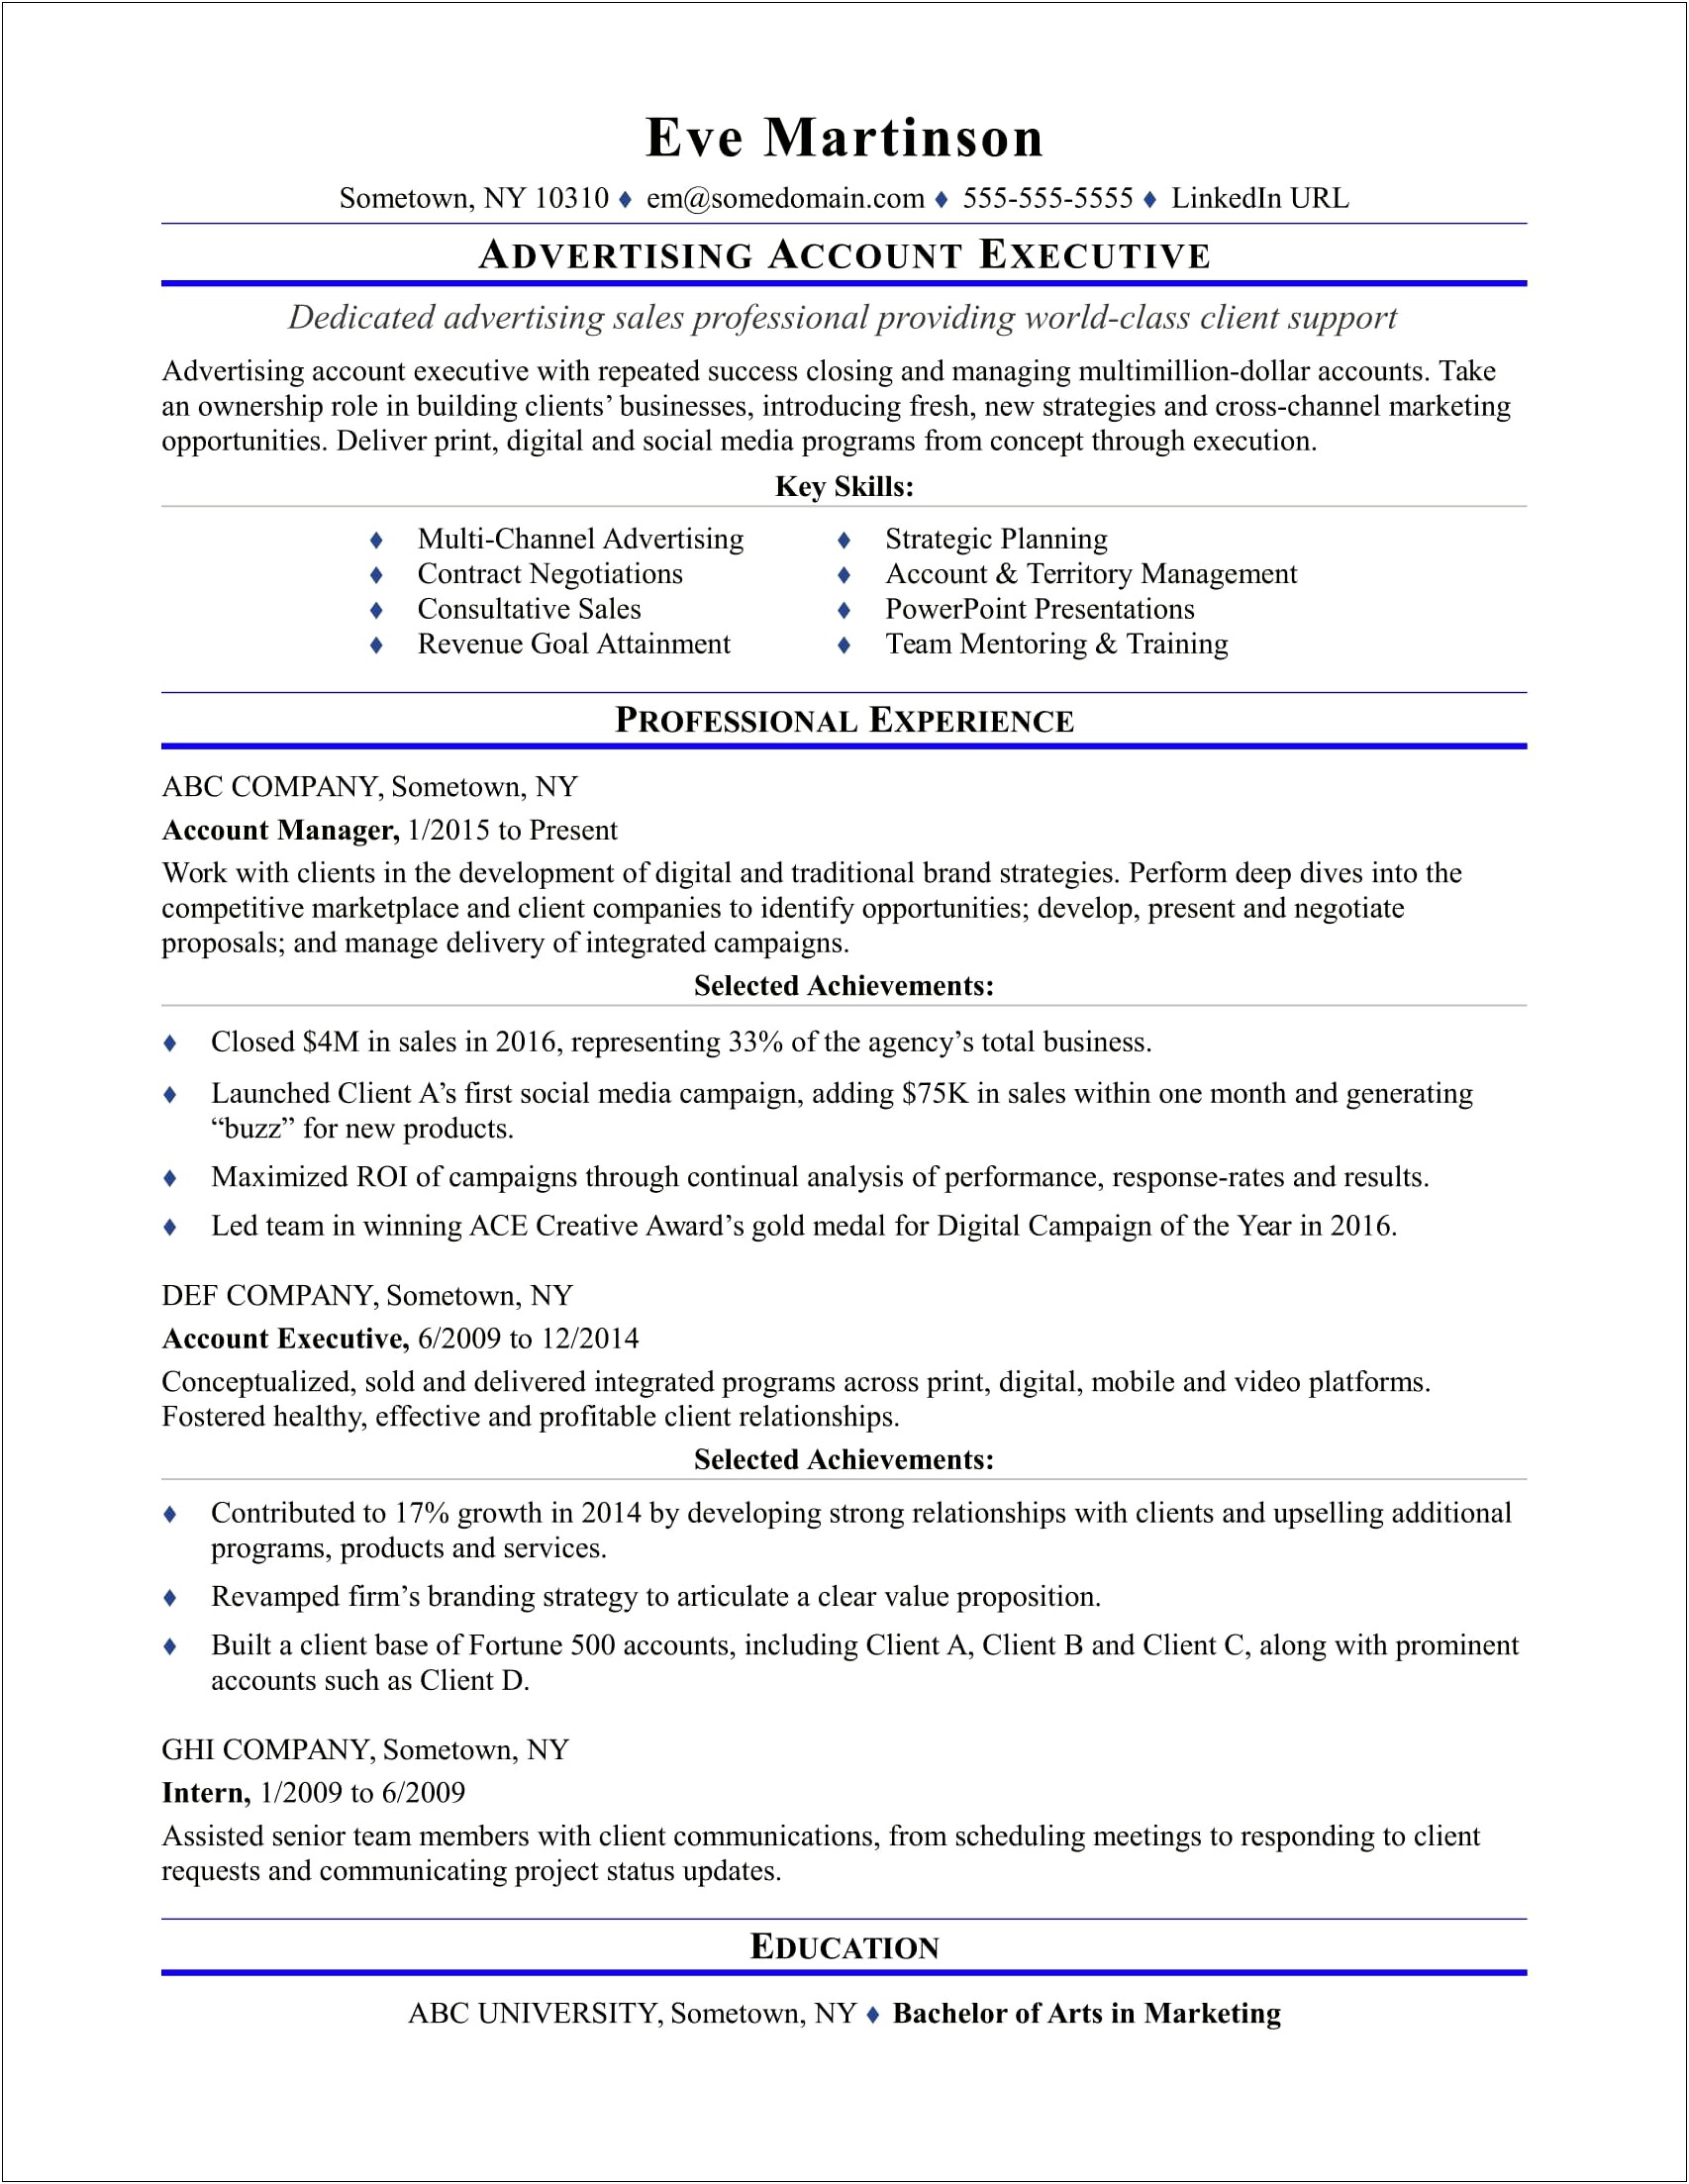 Career Objective For Marketing Executive Resume